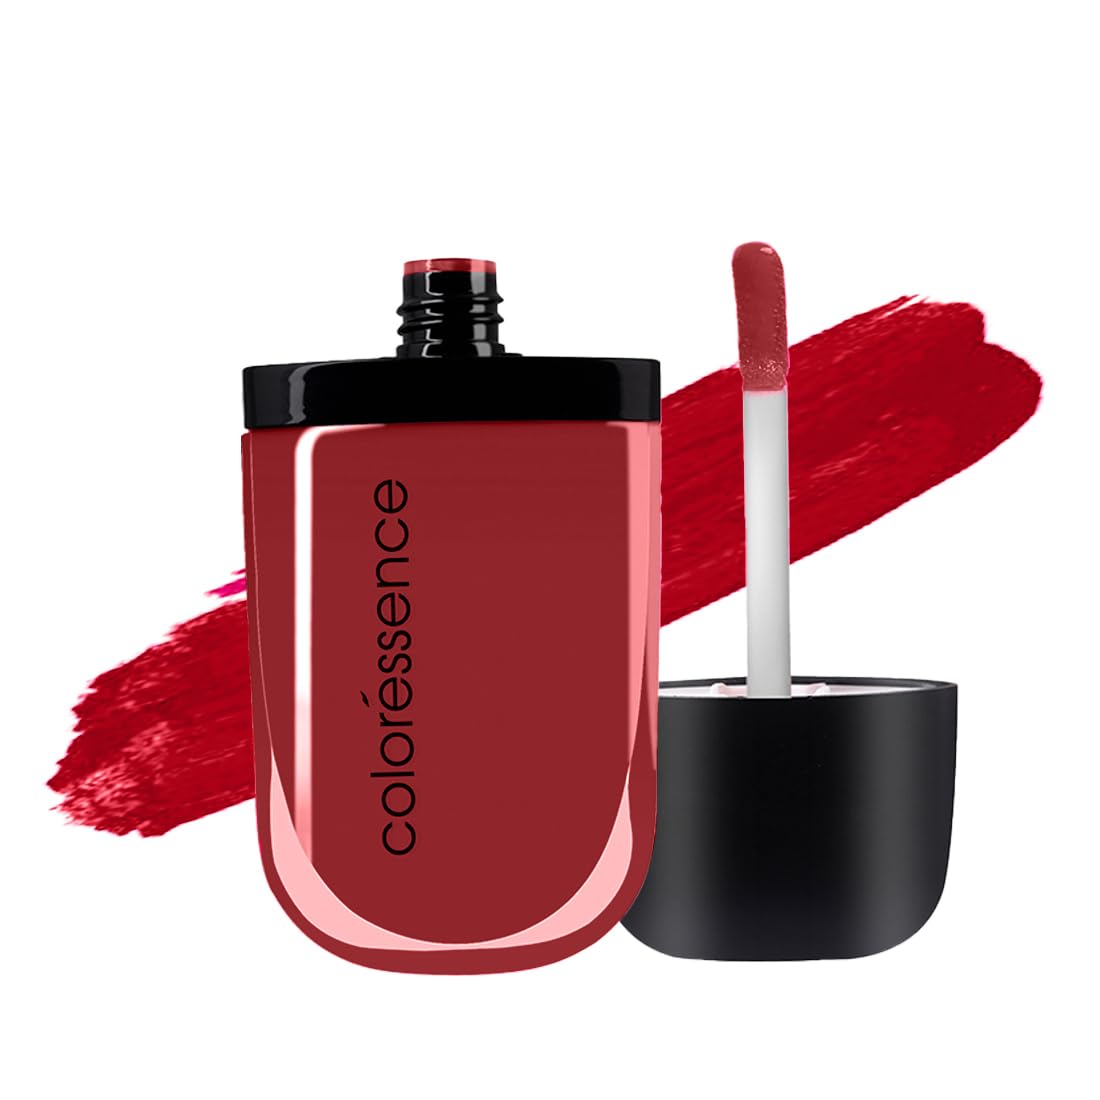 COLORESSENCE Intense Liquid Lip Color | Long Lasting, Smudgeproof, Waterproof and Intense Color Formula for Long Lasting Effect | 9+ Hours Intense Wear & Velvety Matte Finish | Red Alert | 8ml 